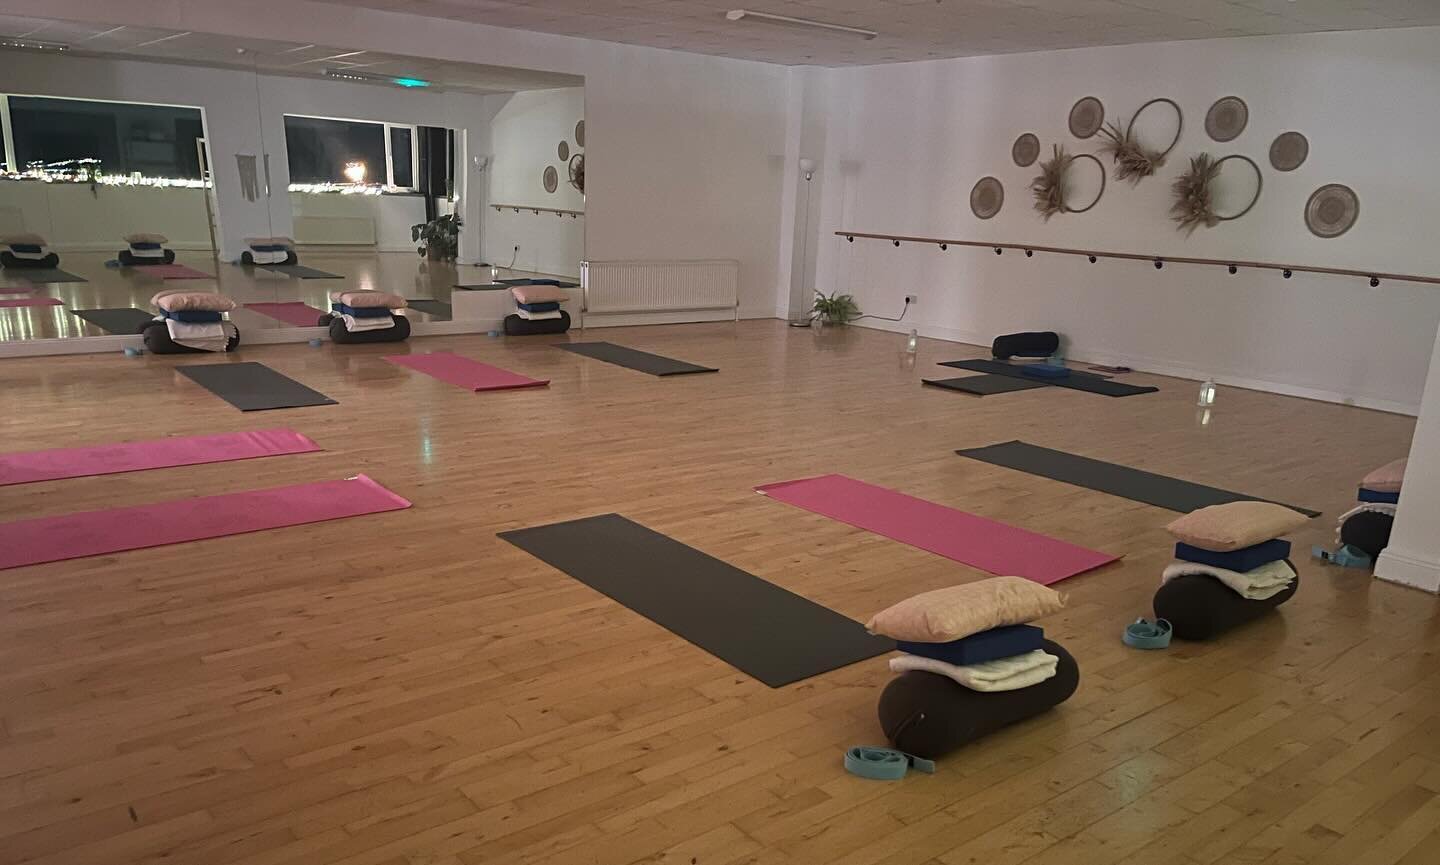 Februarys pregnancy yoga course is almost full! I love teaching this class ❤️ It&rsquo;s such an honour to have these wonderful women return each week and see their confidence grow each week in their ability to listen to their bodies and to trust in 